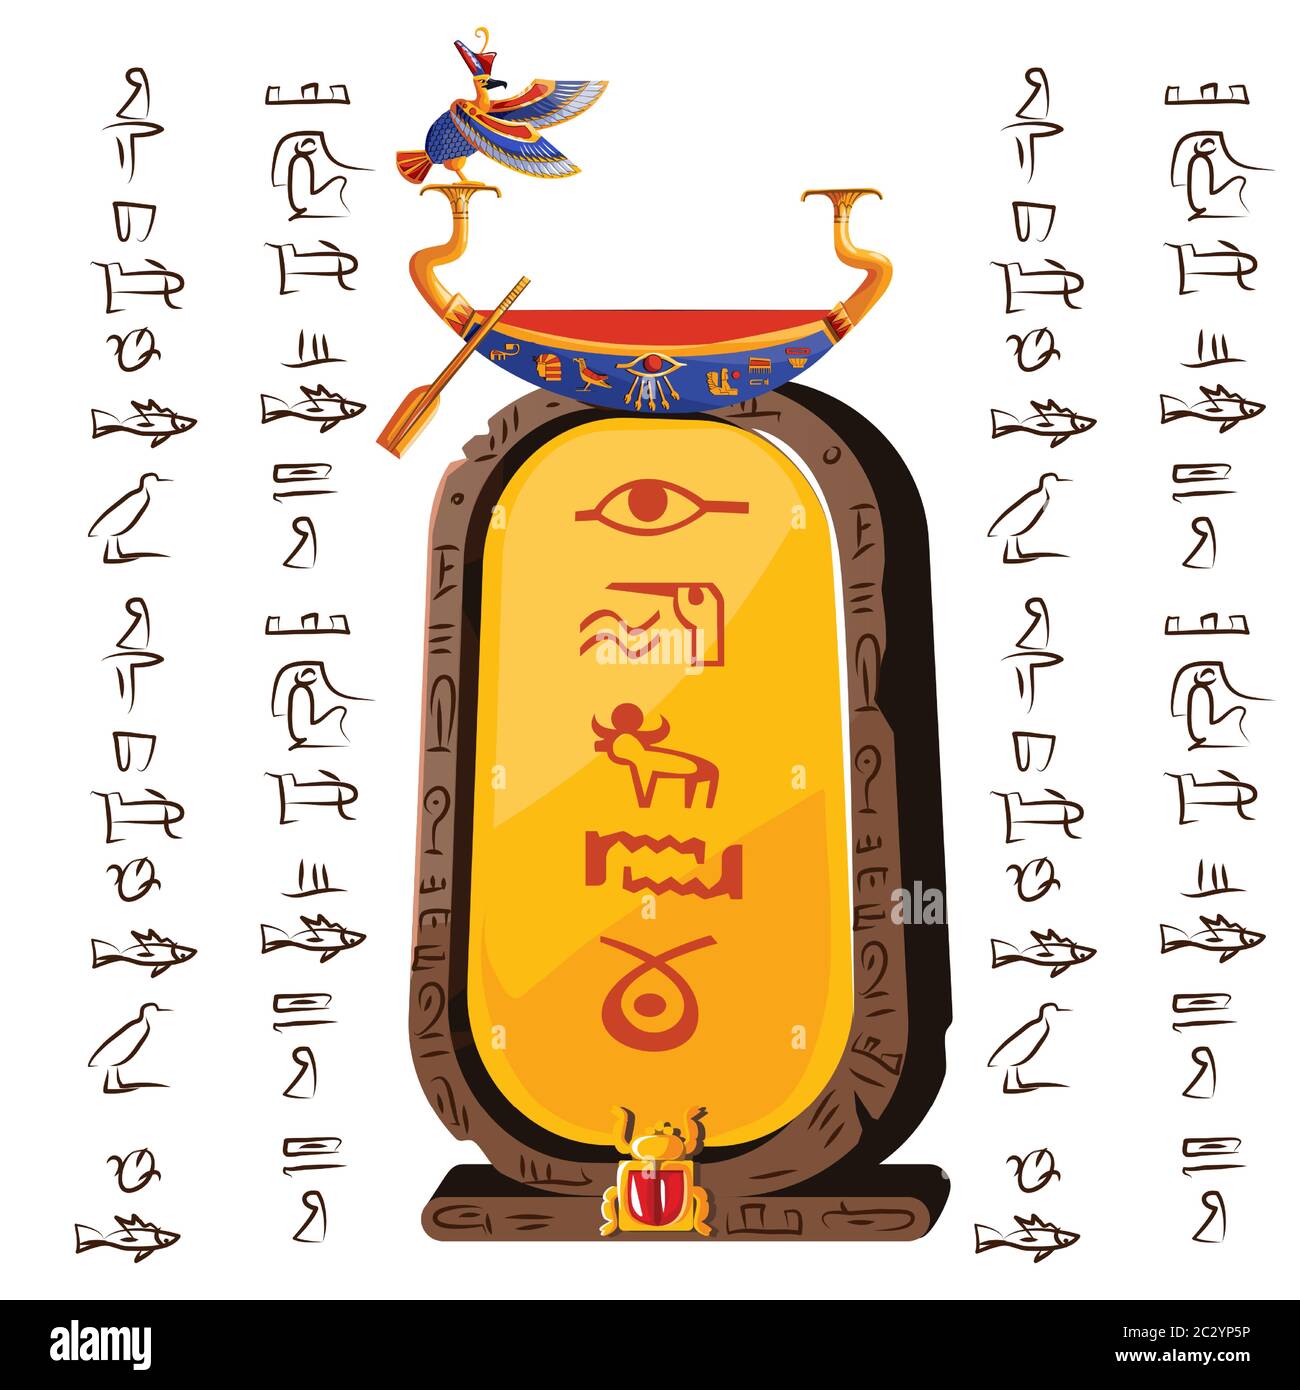 Stone board or clay plate with boat Ra and Egyptian hieroglyphs cartoon vector illustration. Ancient object for recording storing information, graphic Stock Vector